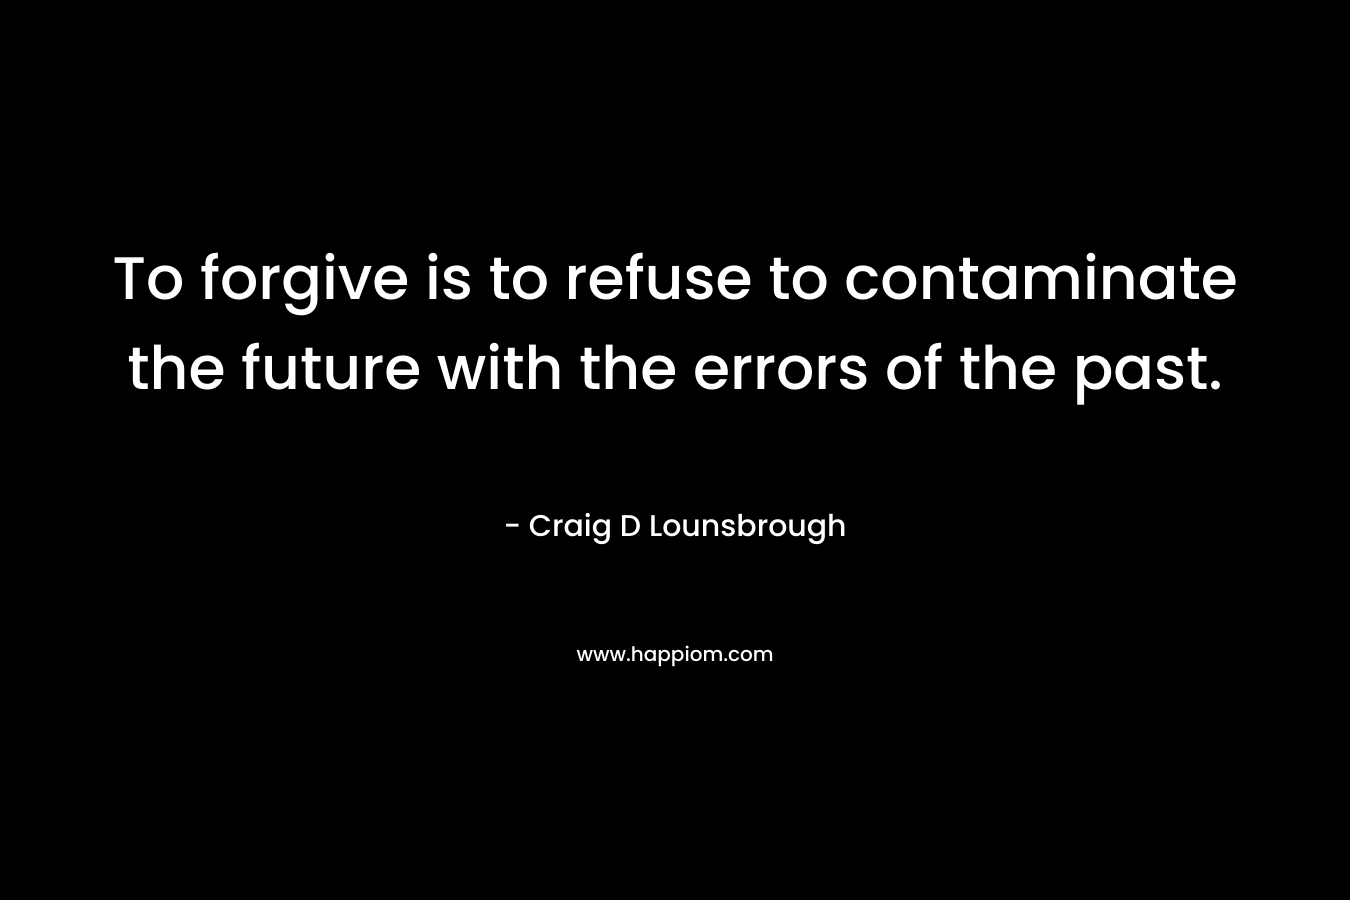 To forgive is to refuse to contaminate the future with the errors of the past.